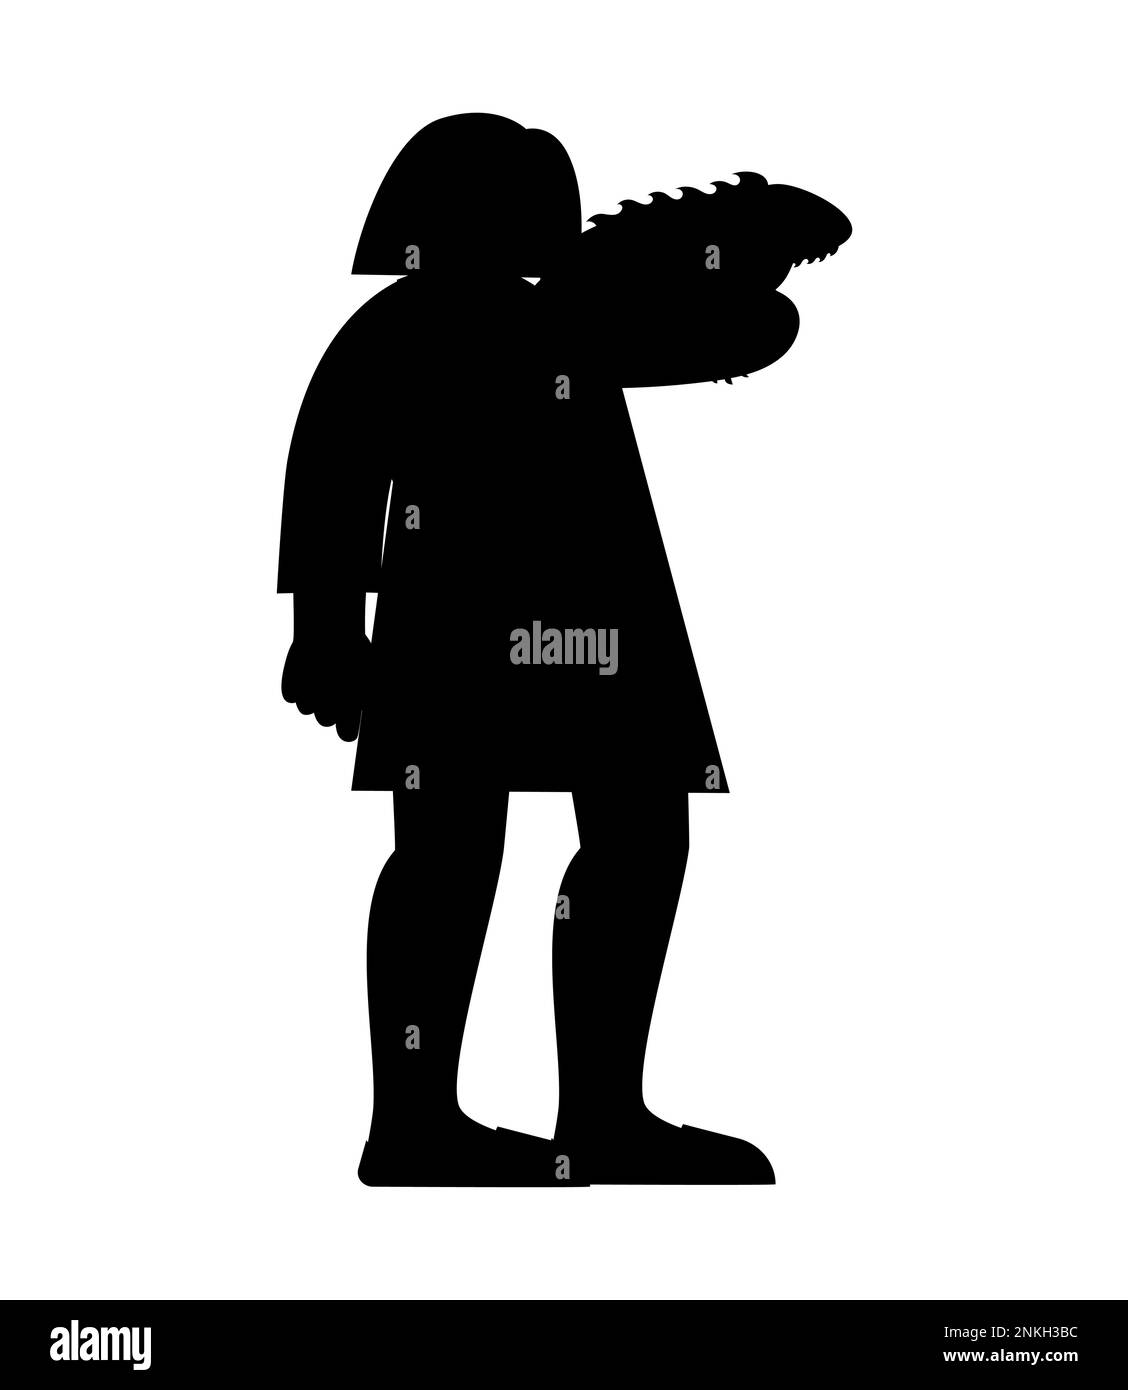 Black silhouette of a girl carrying a chameleon in hand Stock Vector